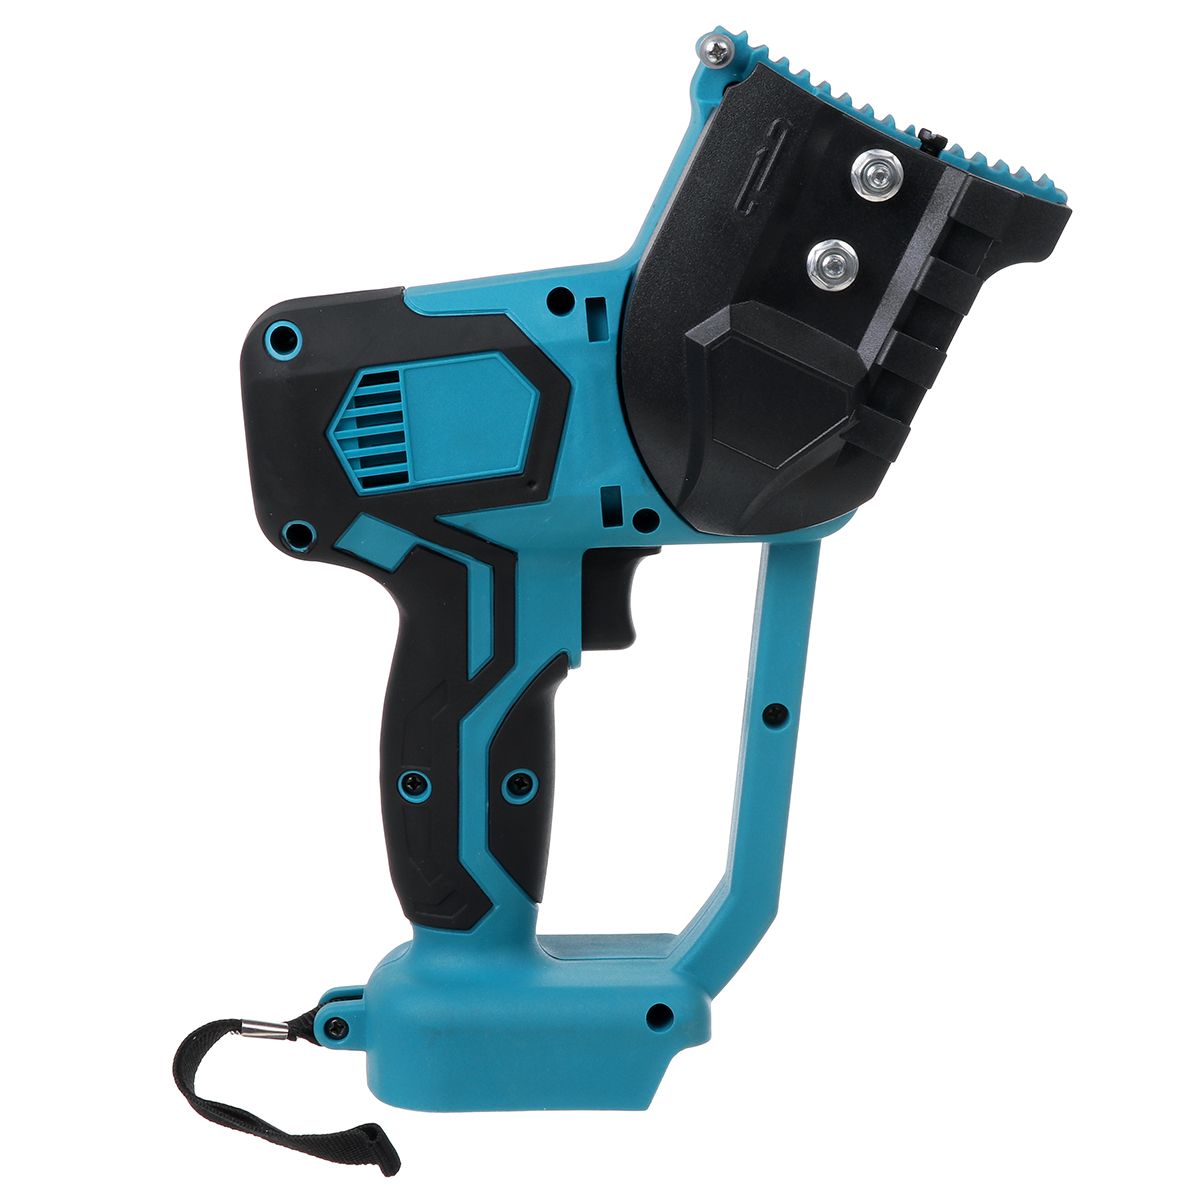 Portable-Cordless-Electric-Chain-Saw-8-Inch-Chainsaw-Woodworking-Power-Tool-For-Makita-18V-Battery-1765152